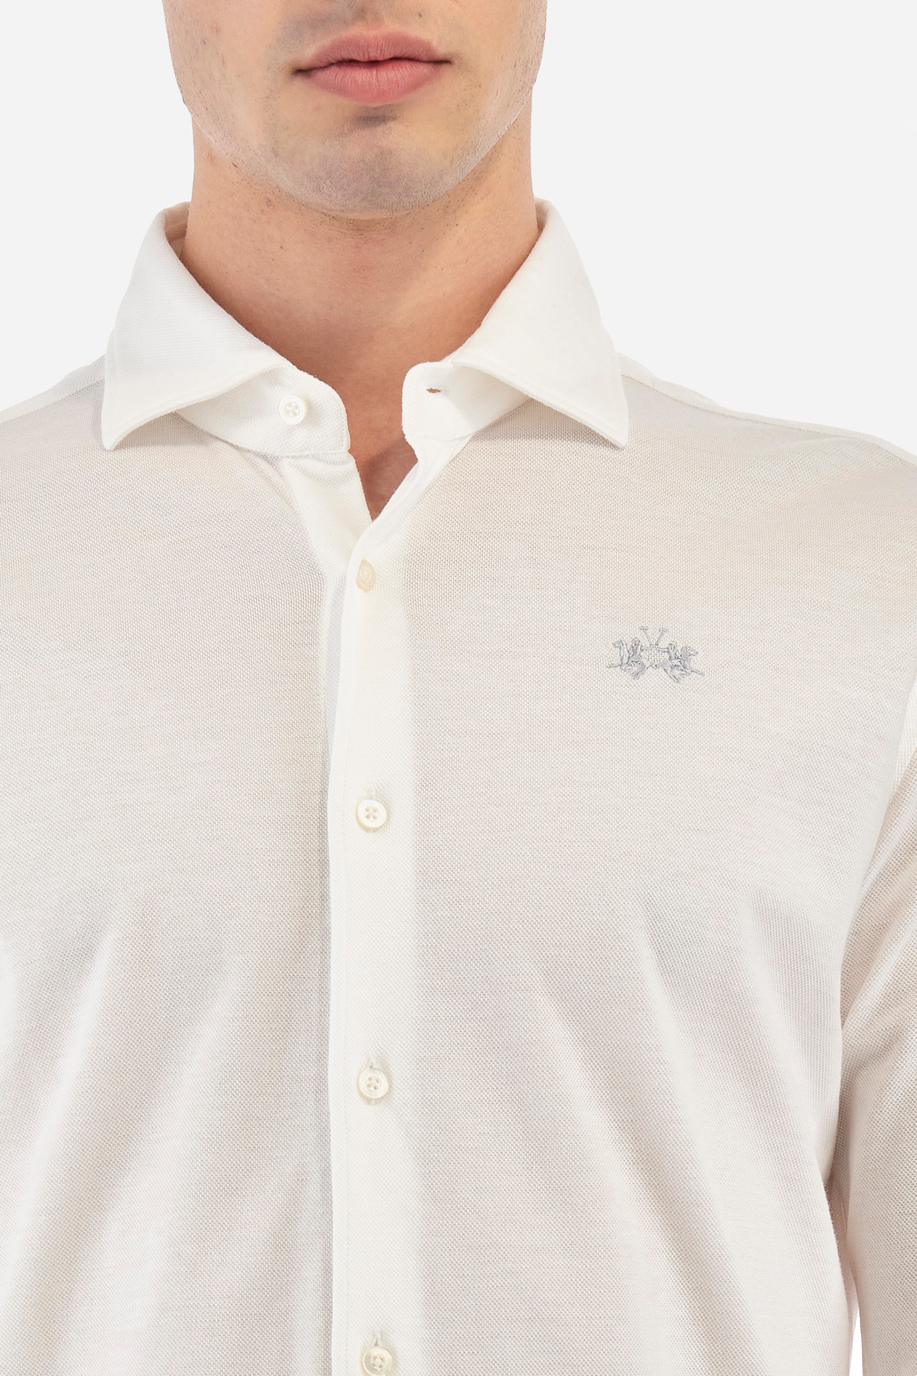 Long-sleeved shirt in cotton piqué, fitted cut for men - Qalam - Shirts | La Martina - Official Online Shop